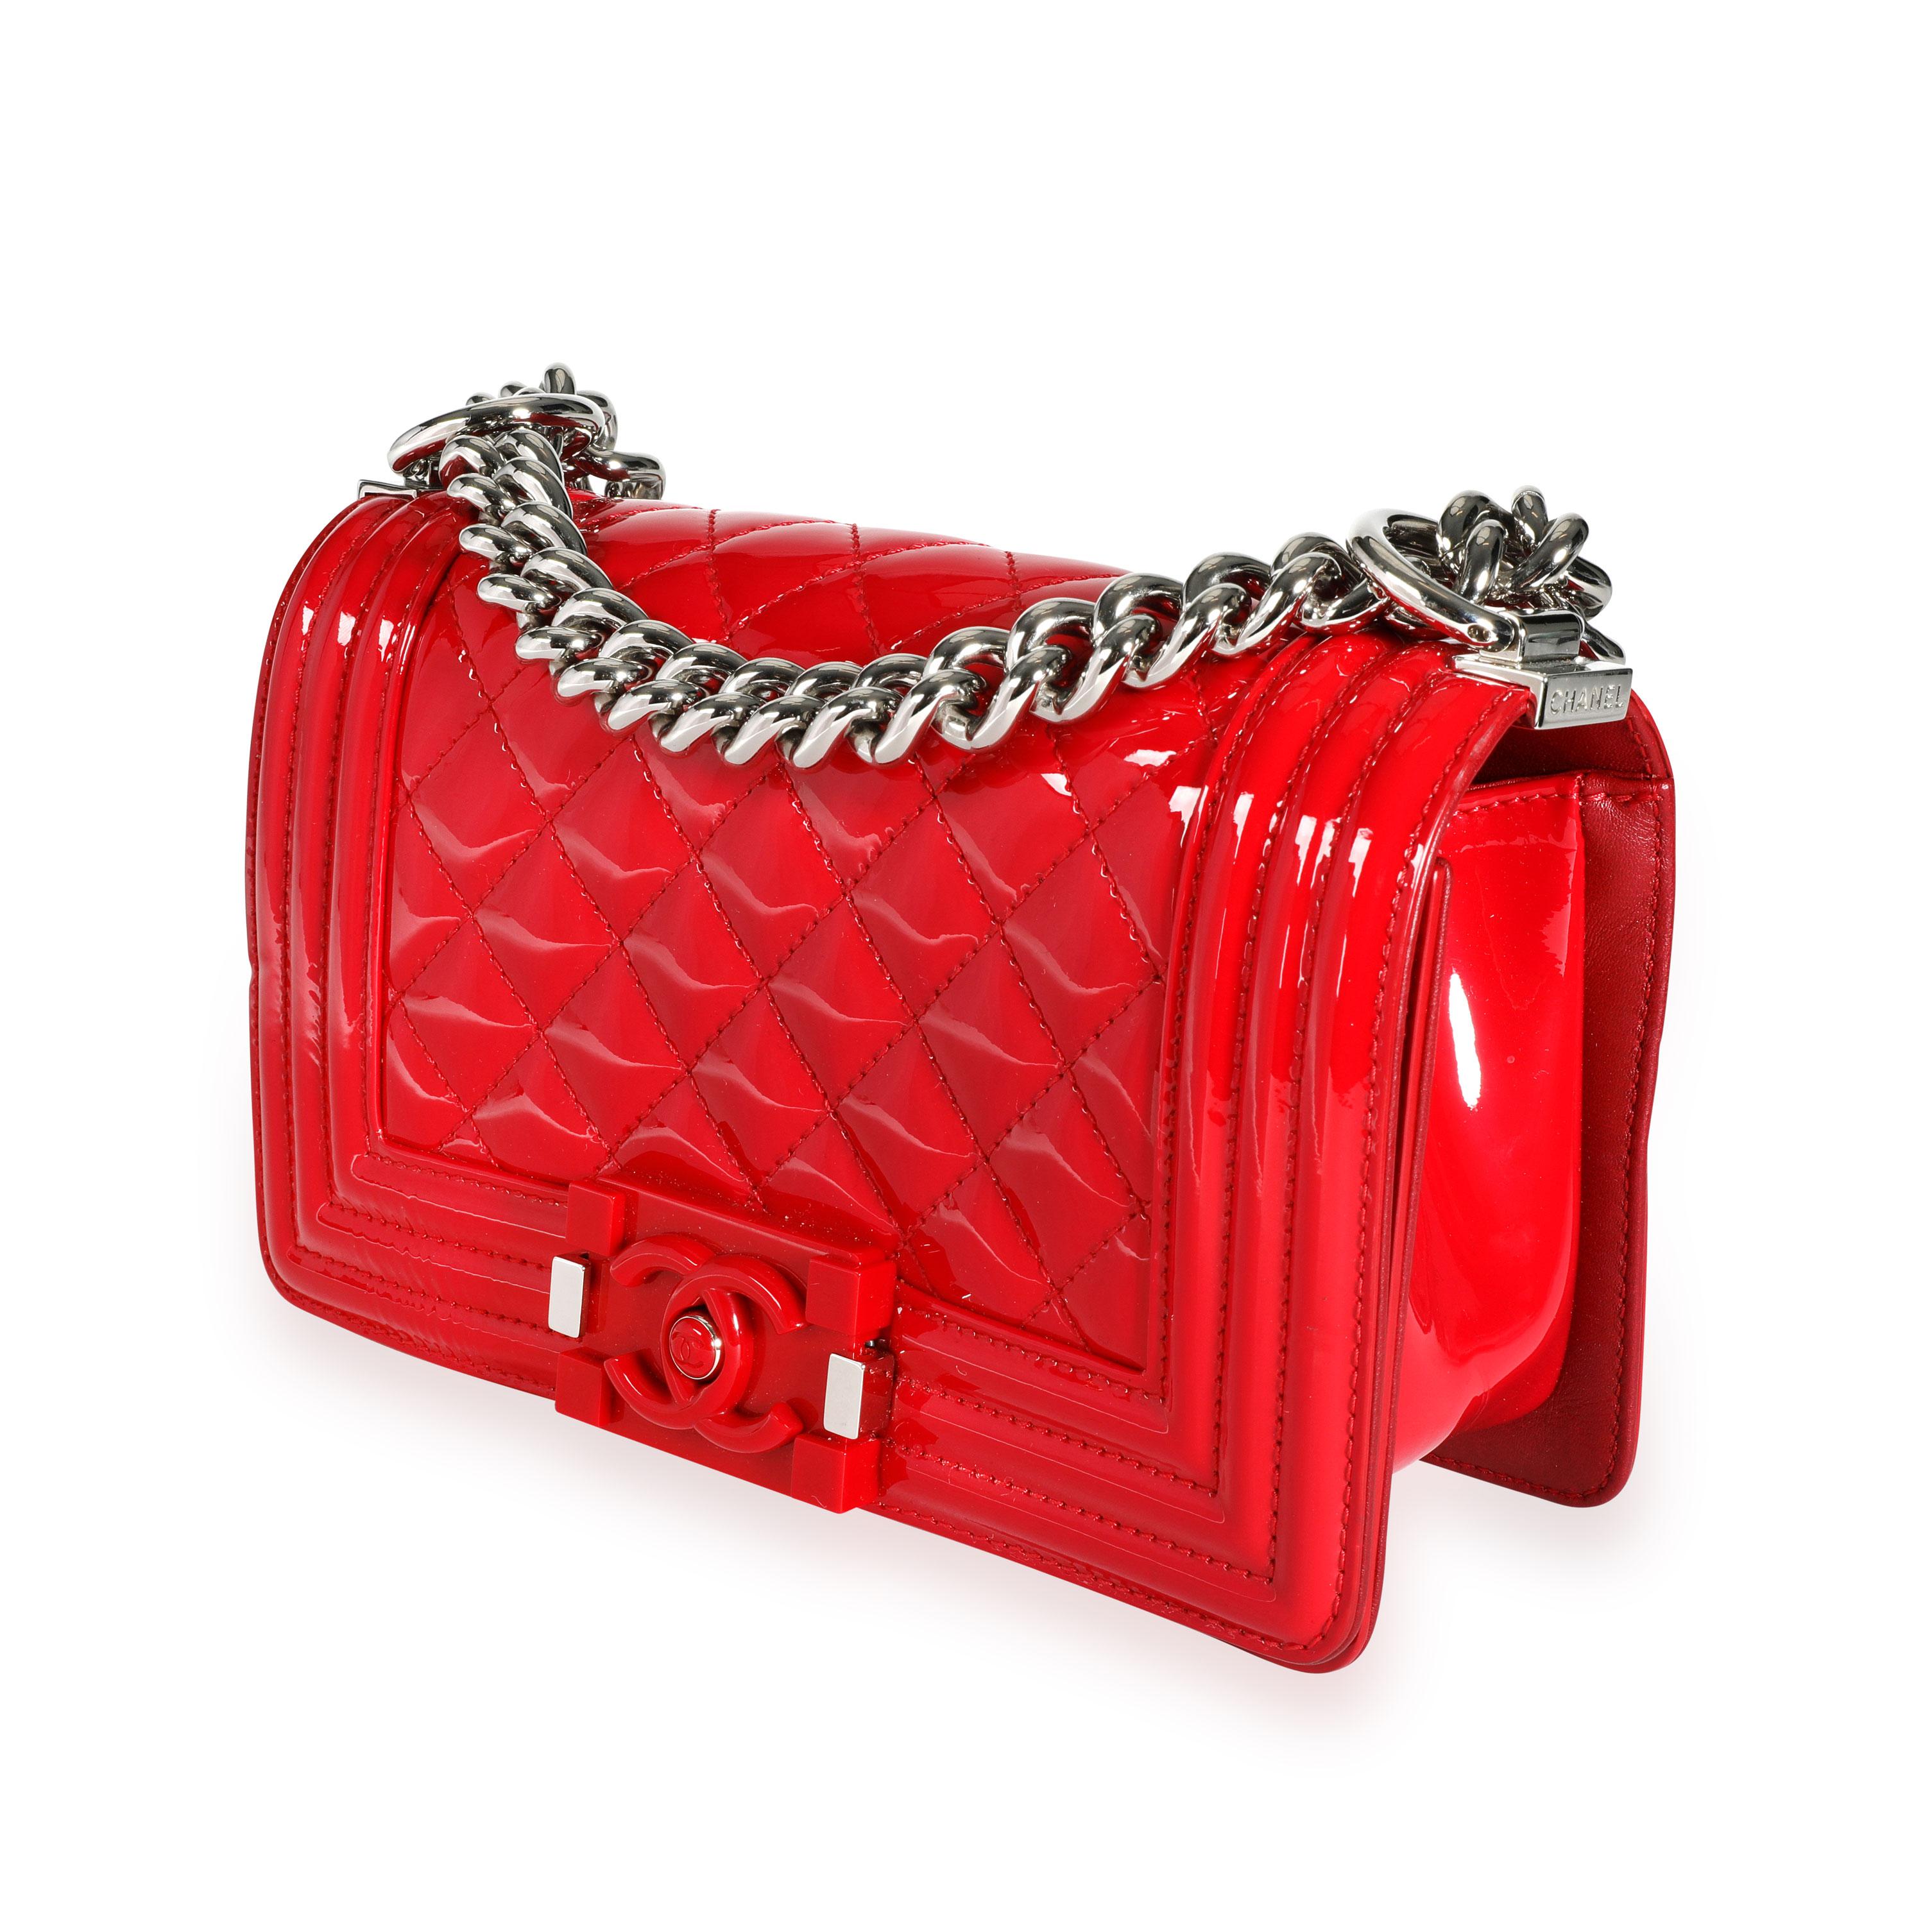 Chanel Red Quilted Patent Leather & Plexiglass Small Boy Bag
SKU: 112164
MSRP: USD 4,300.00
Condition: Pre-owned (3000)
Condition Description: 
Handbag Condition: Very Good
Condition Comments: Very Good Condition. Wear at corners. Scratching to